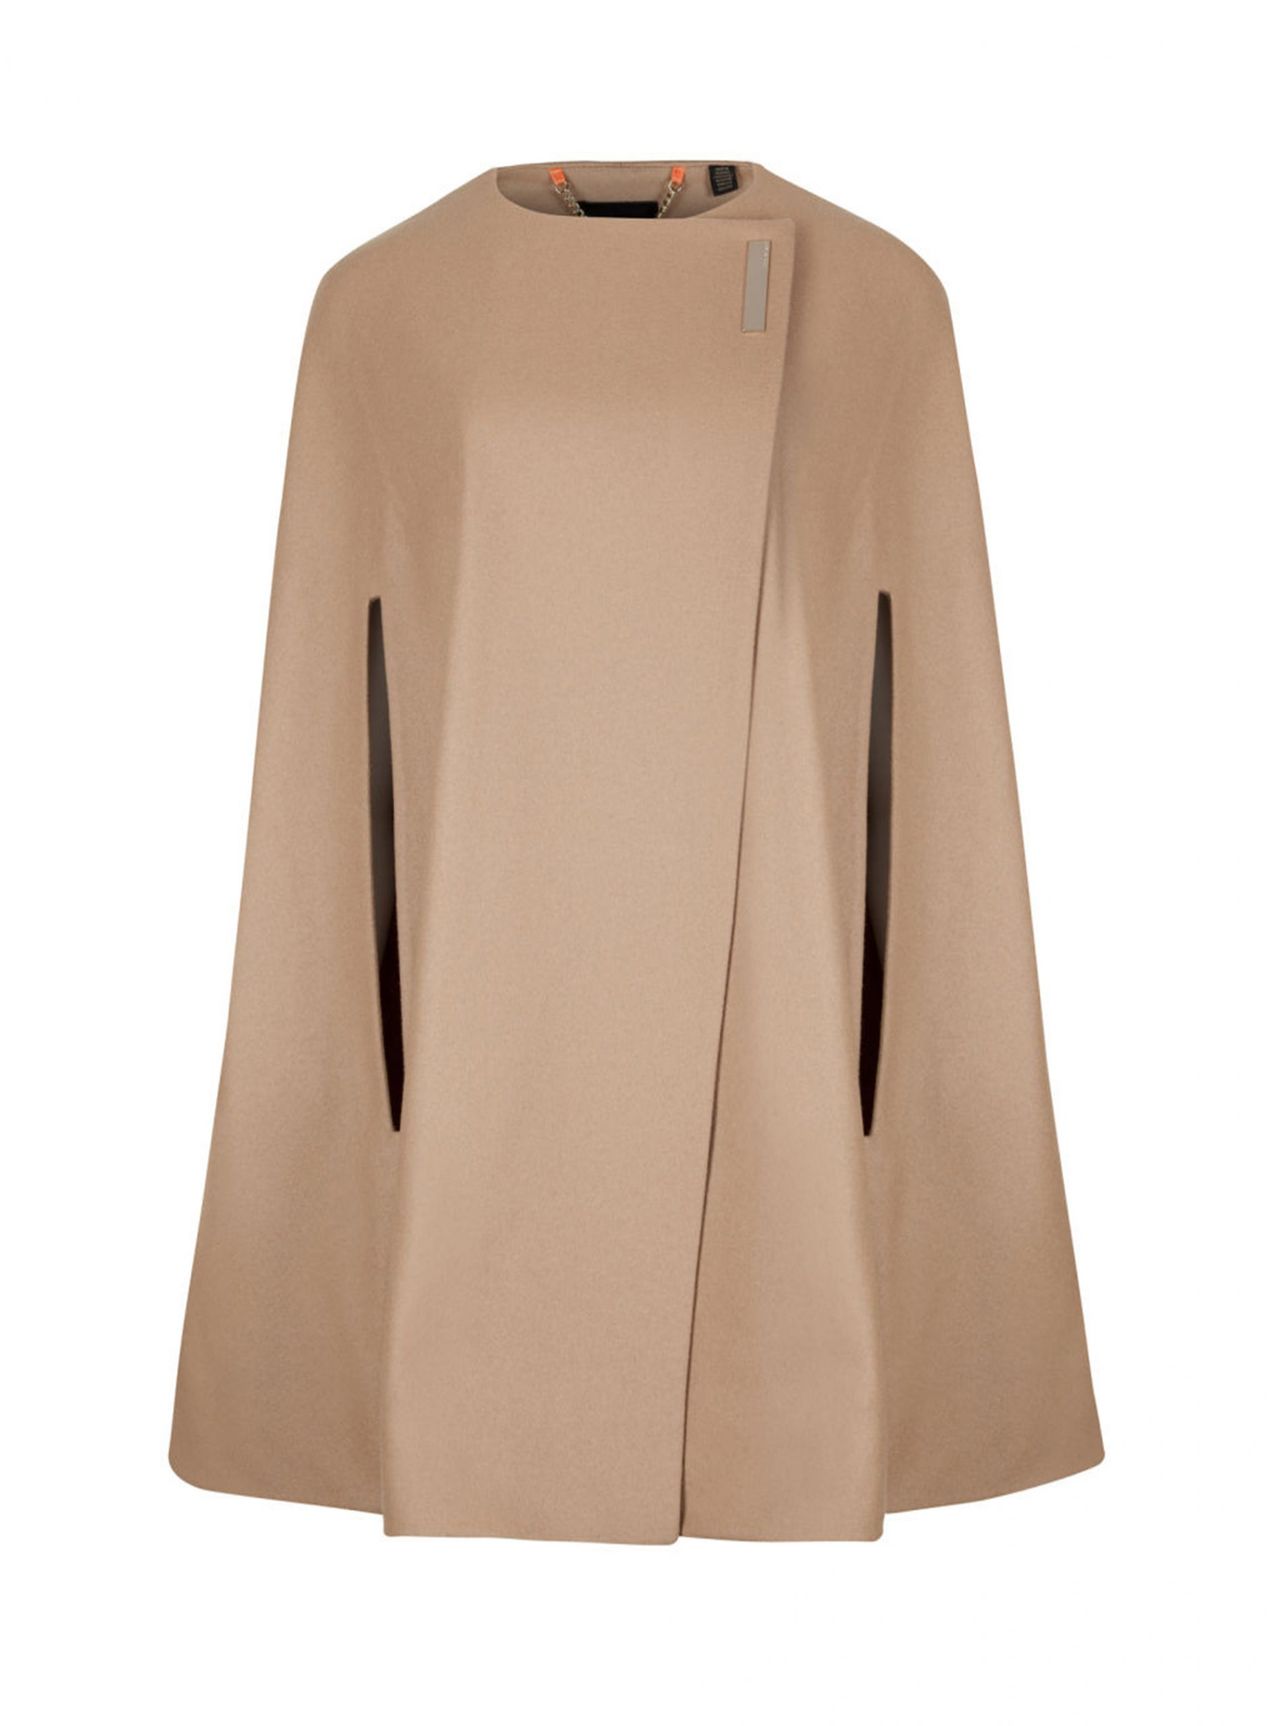 Great Capes To Covet This Season | Woman & Home